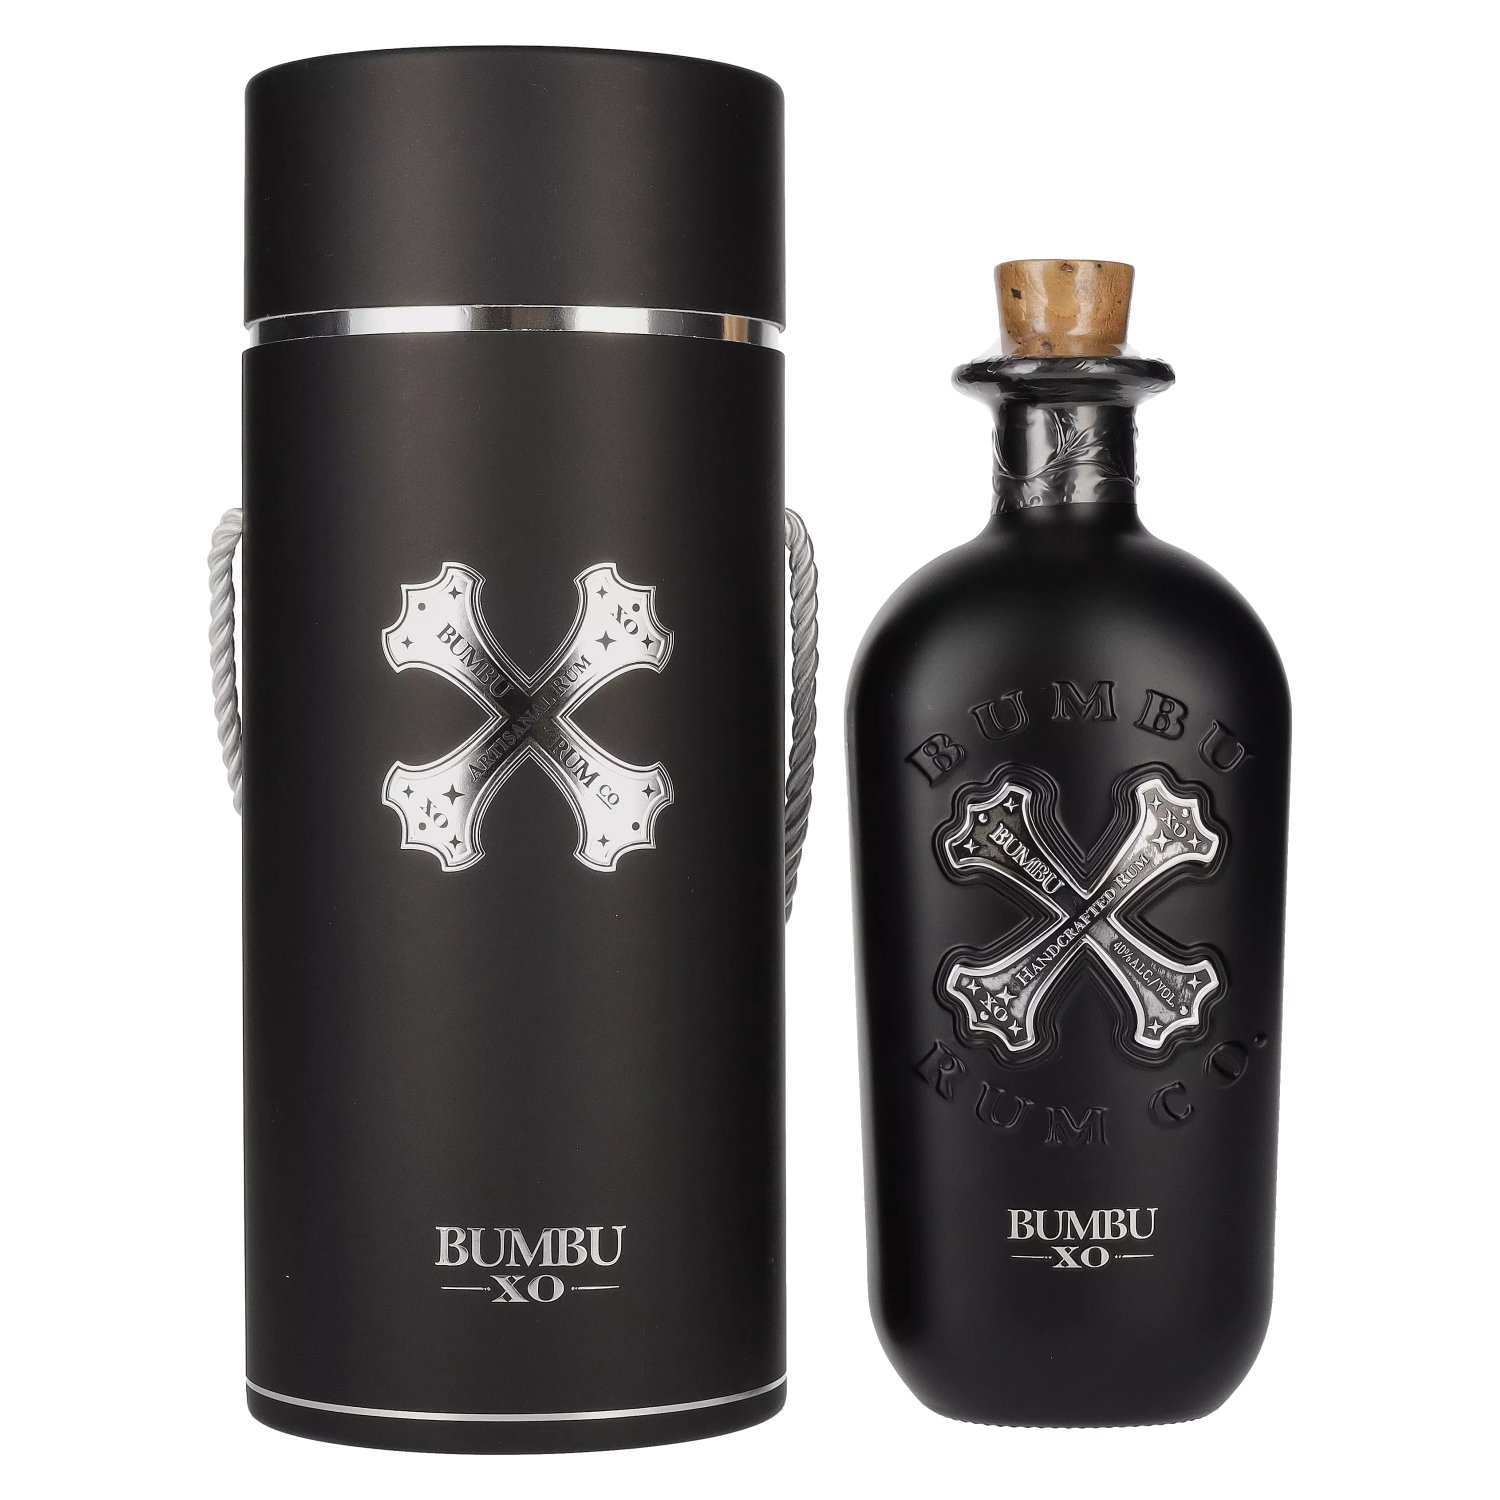 0,7l 40% Set Limited XO Edition in Vol. Handcrafted Bumbu Rum Giftbox Gift